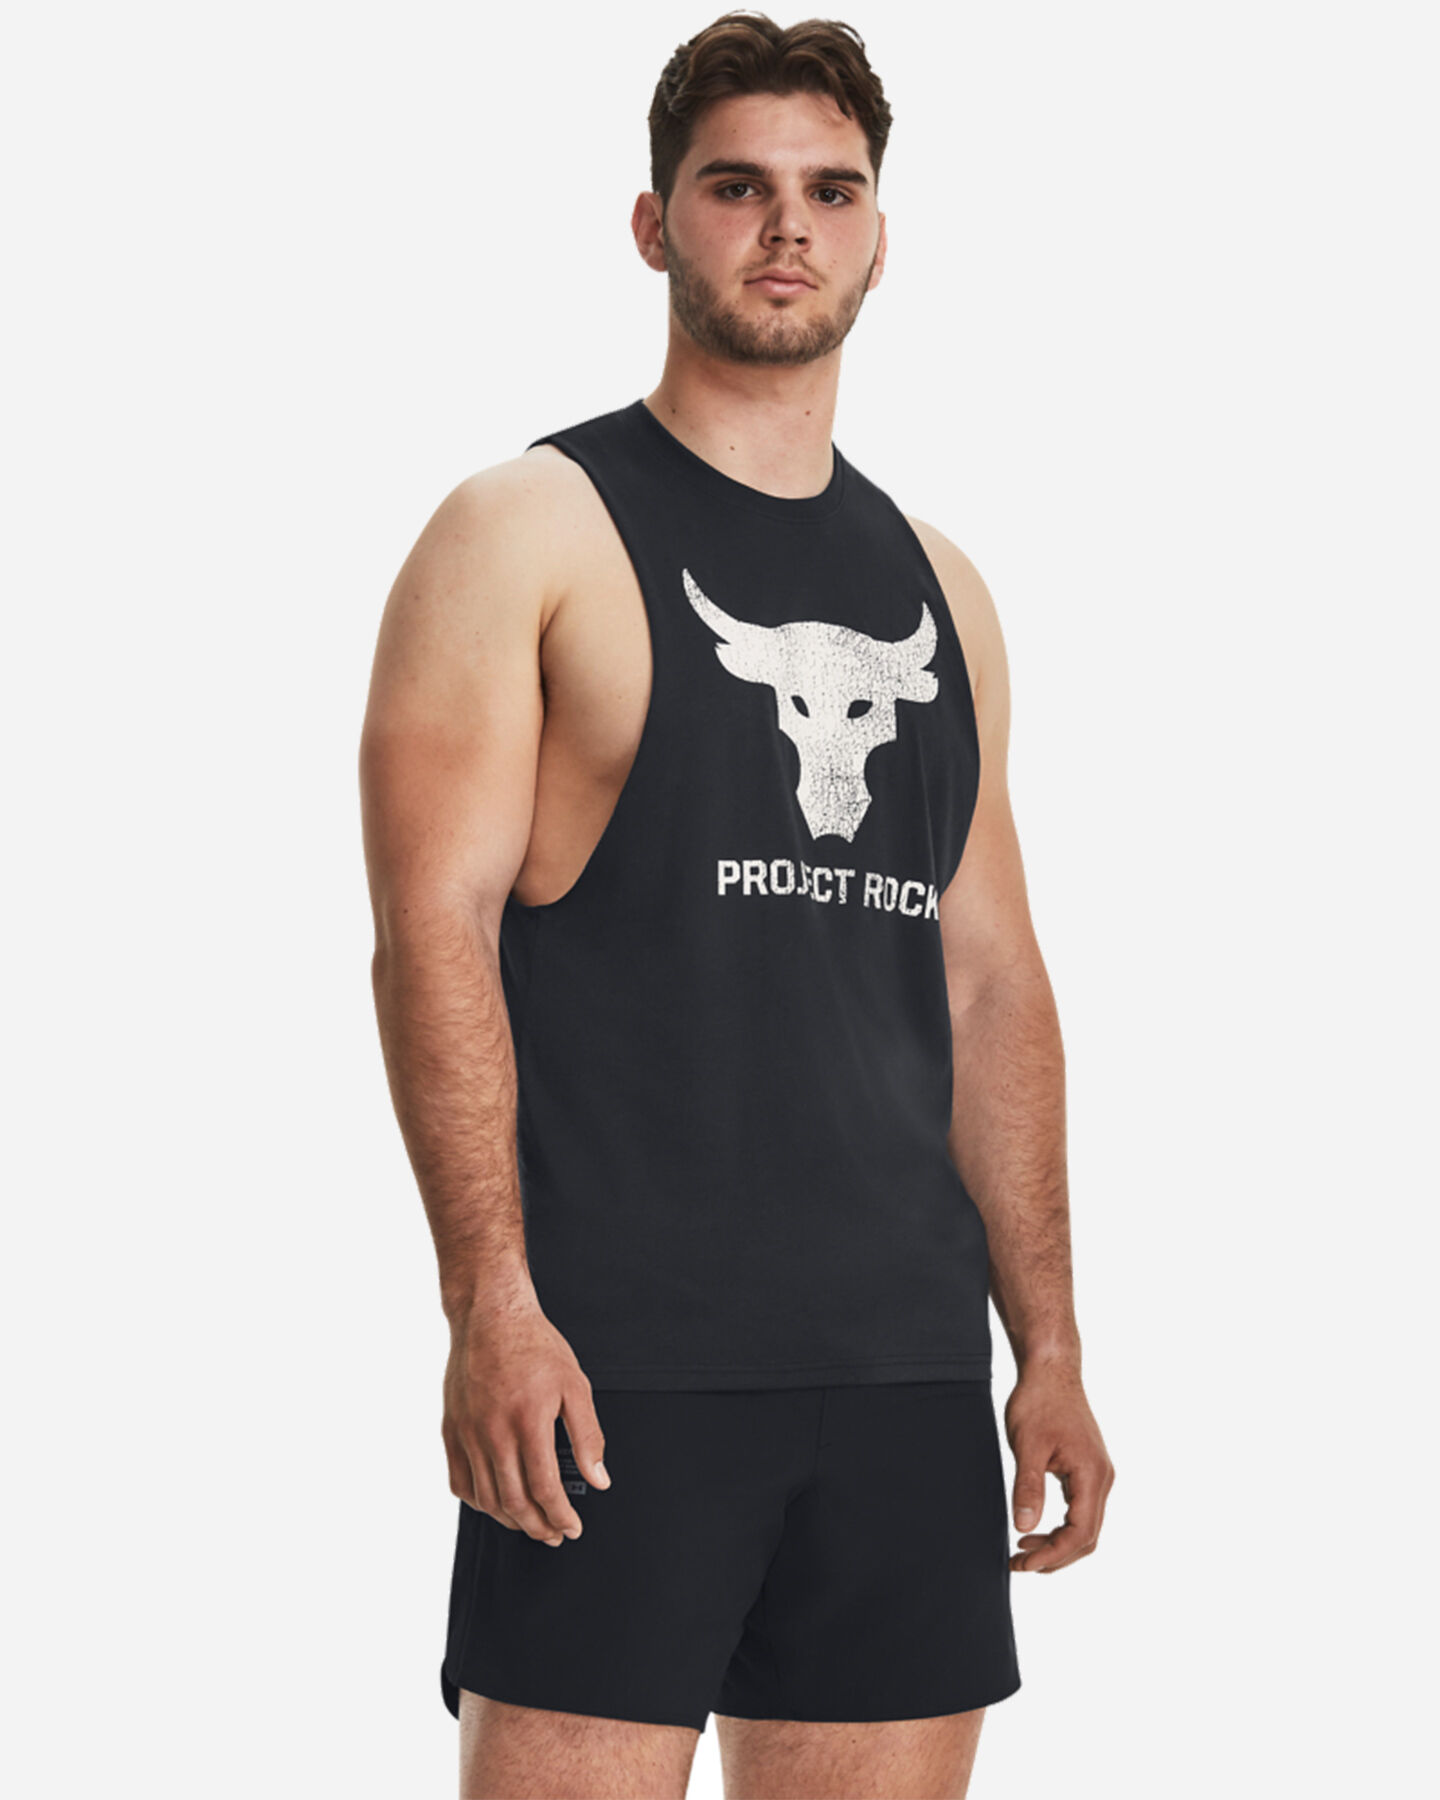  Canotta UNDER ARMOUR THE ROCK PJT BRAHMA BULL M S5579004|0003|XS scatto 0